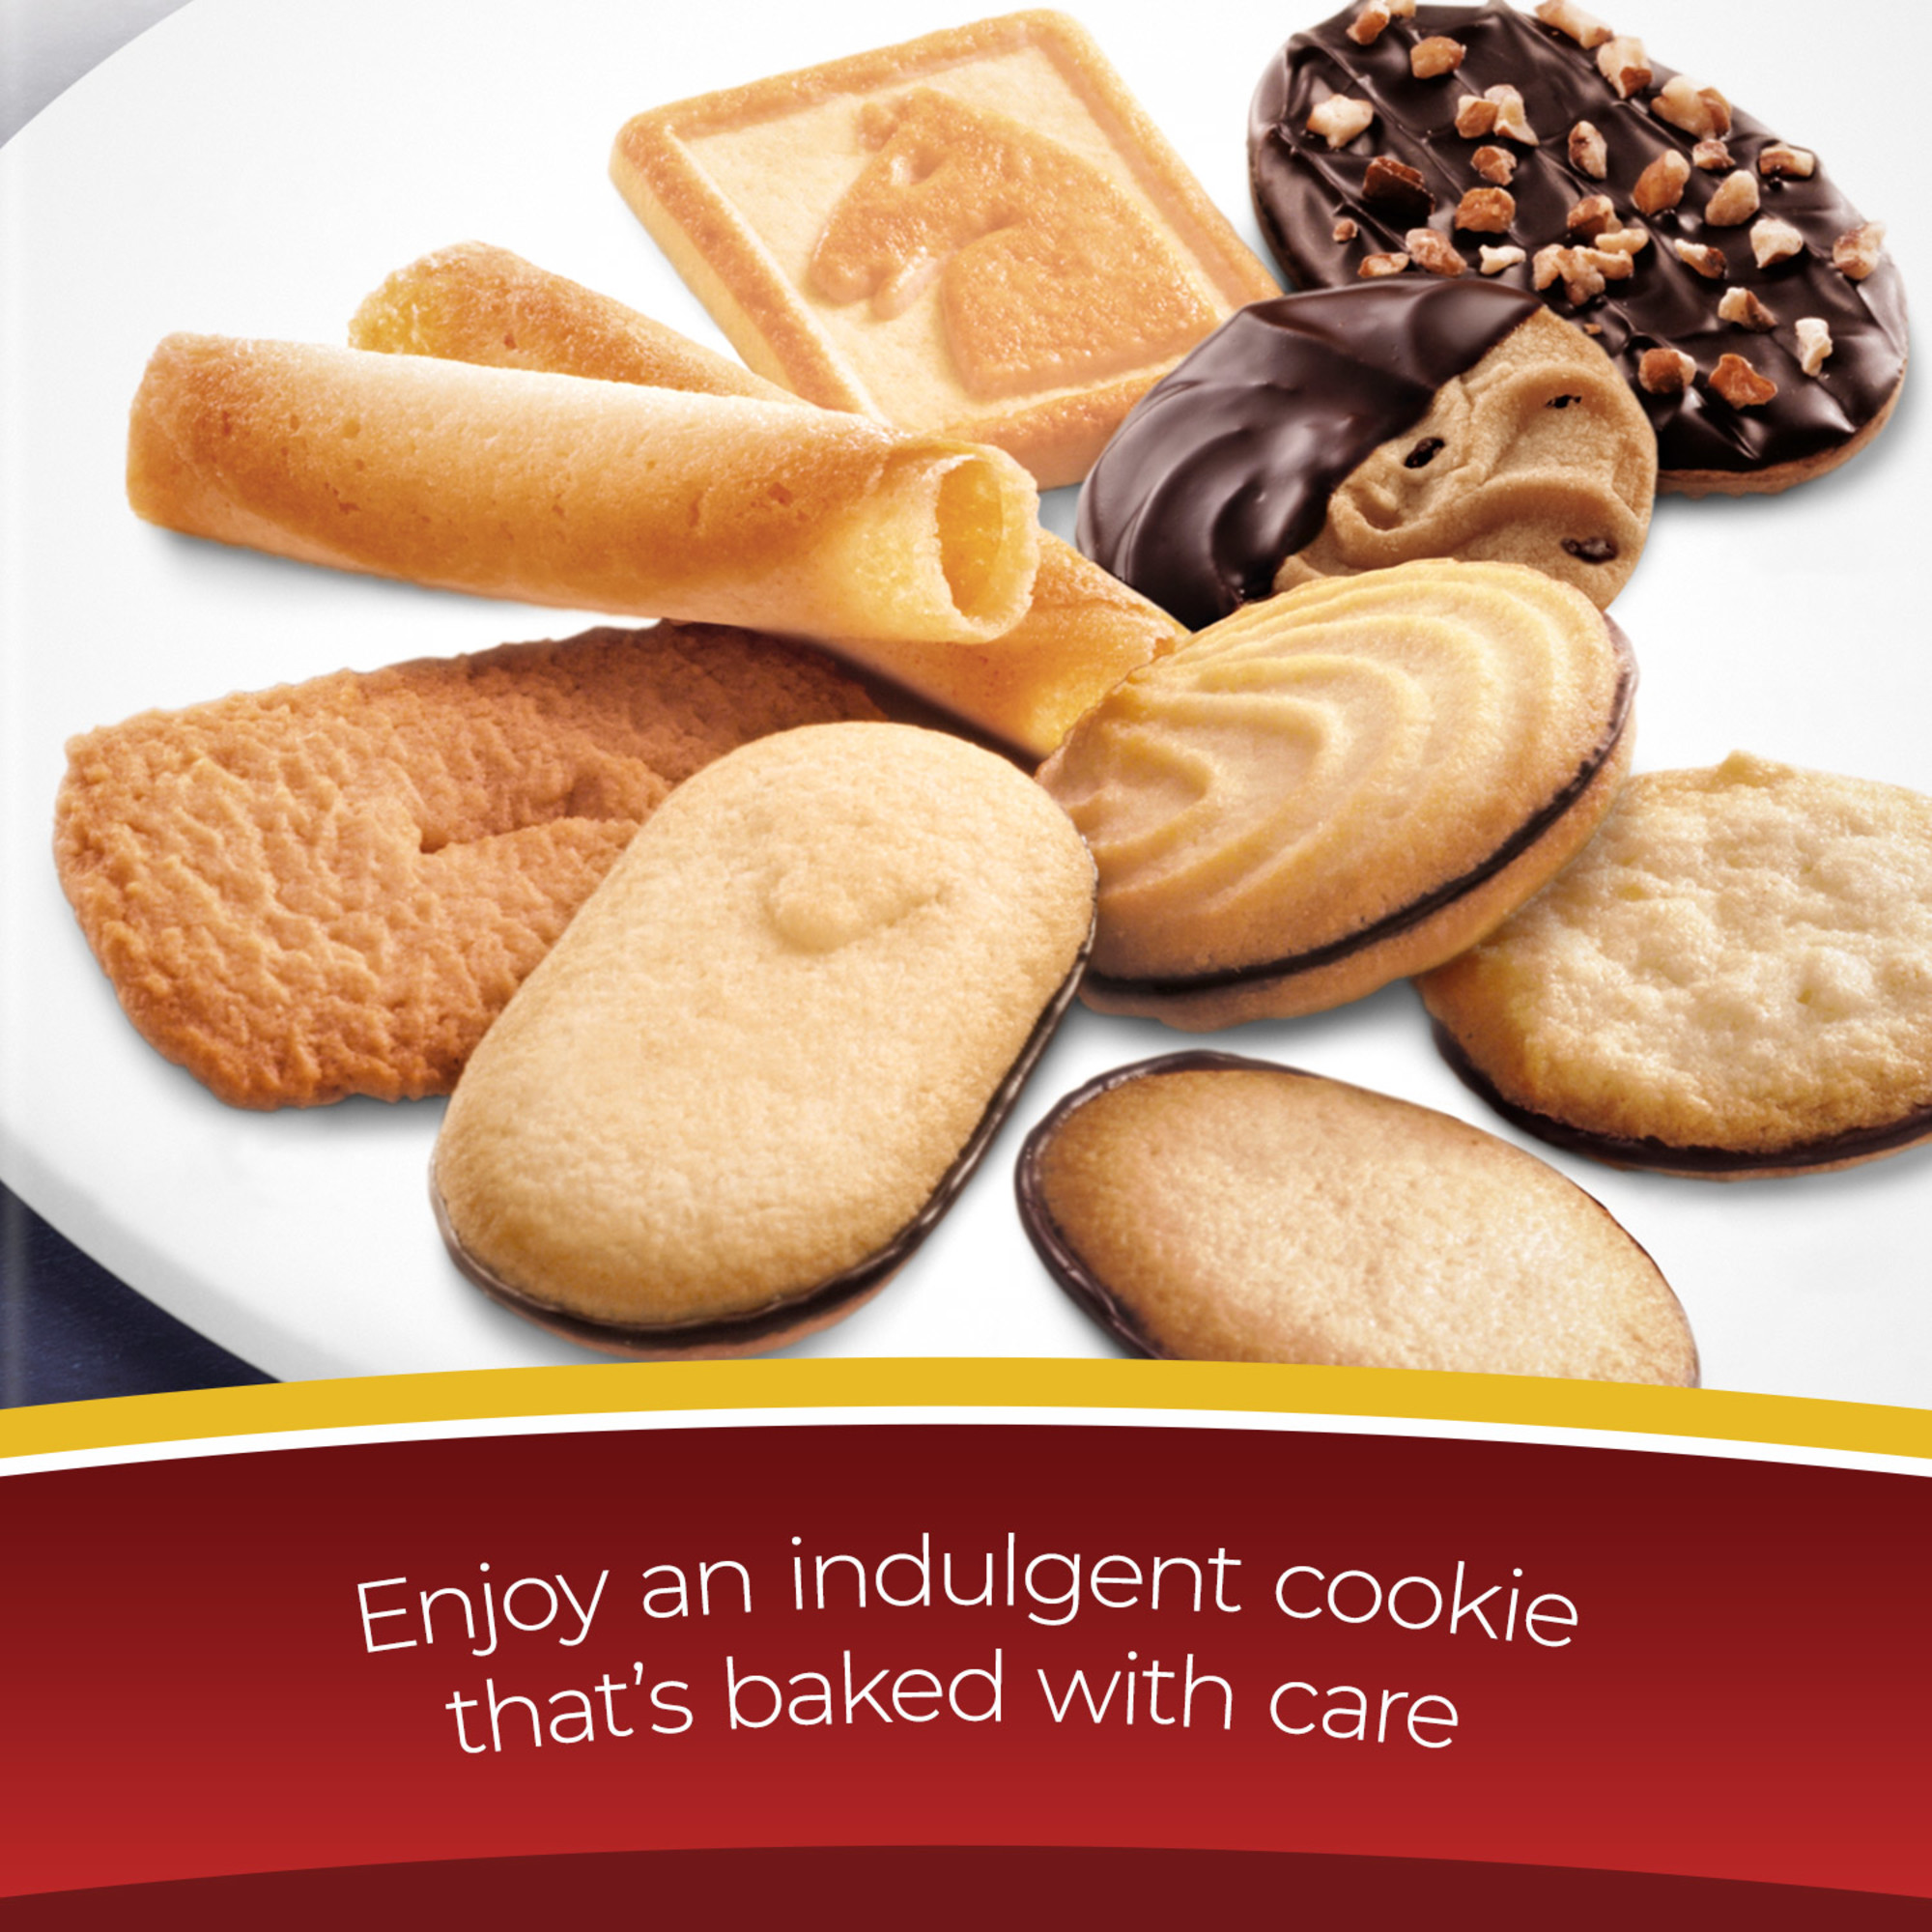 Pepperidge Farm Cookies Classic Collection, 9 Cookie Varieties, 13.25 oz. Box - image 3 of 8